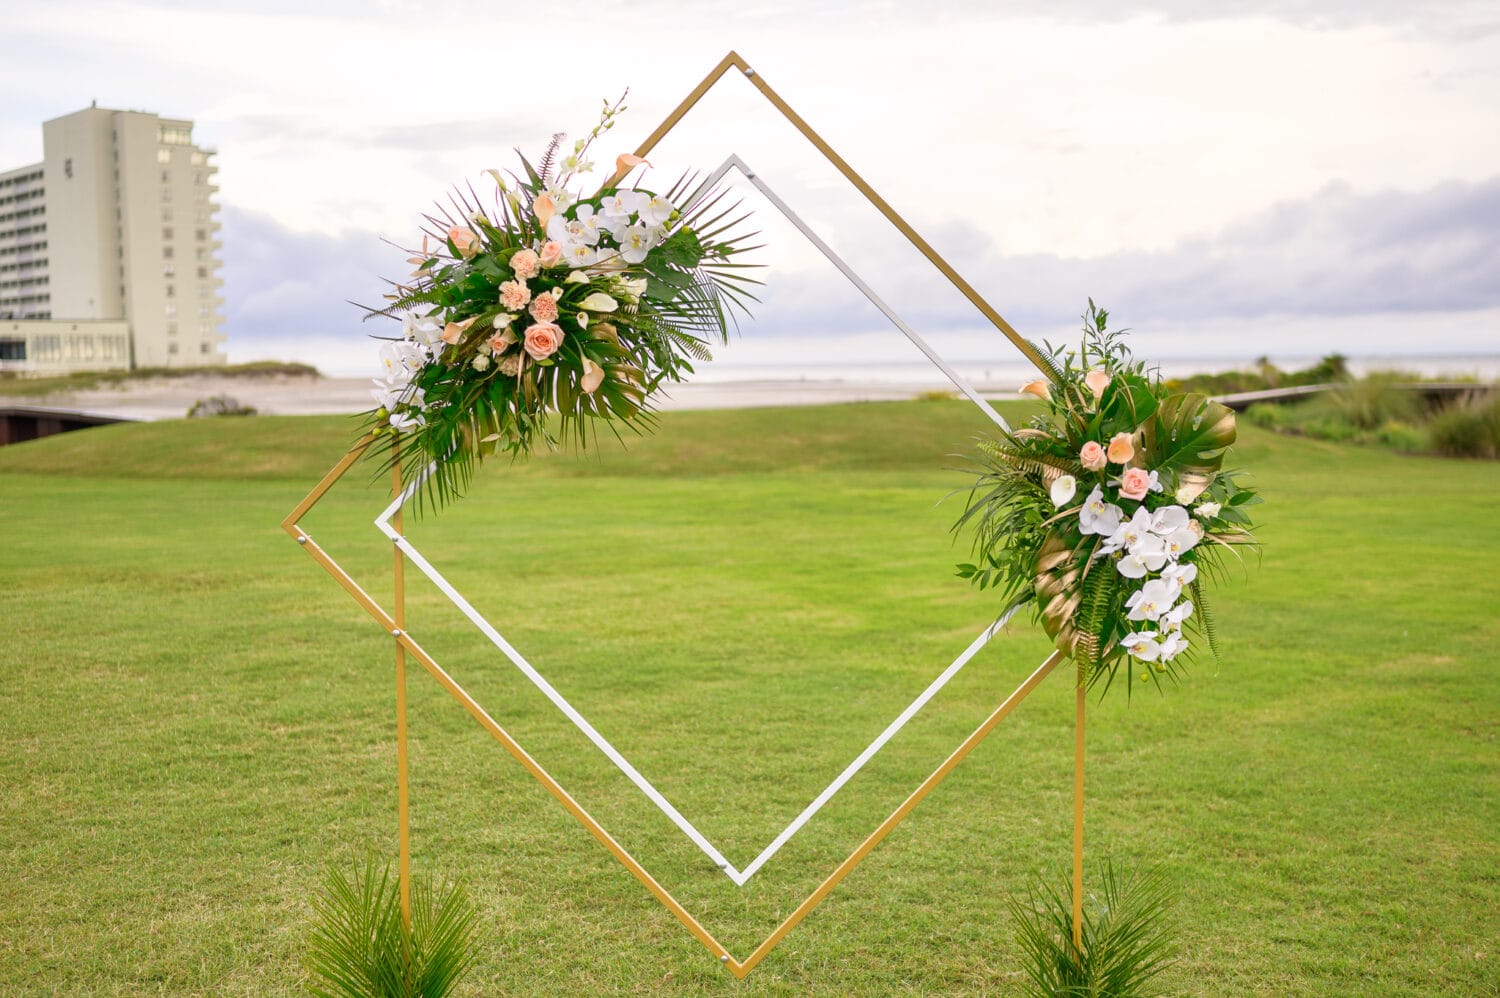 Background for wedding ceremony - Dunes Golf and Beach Club